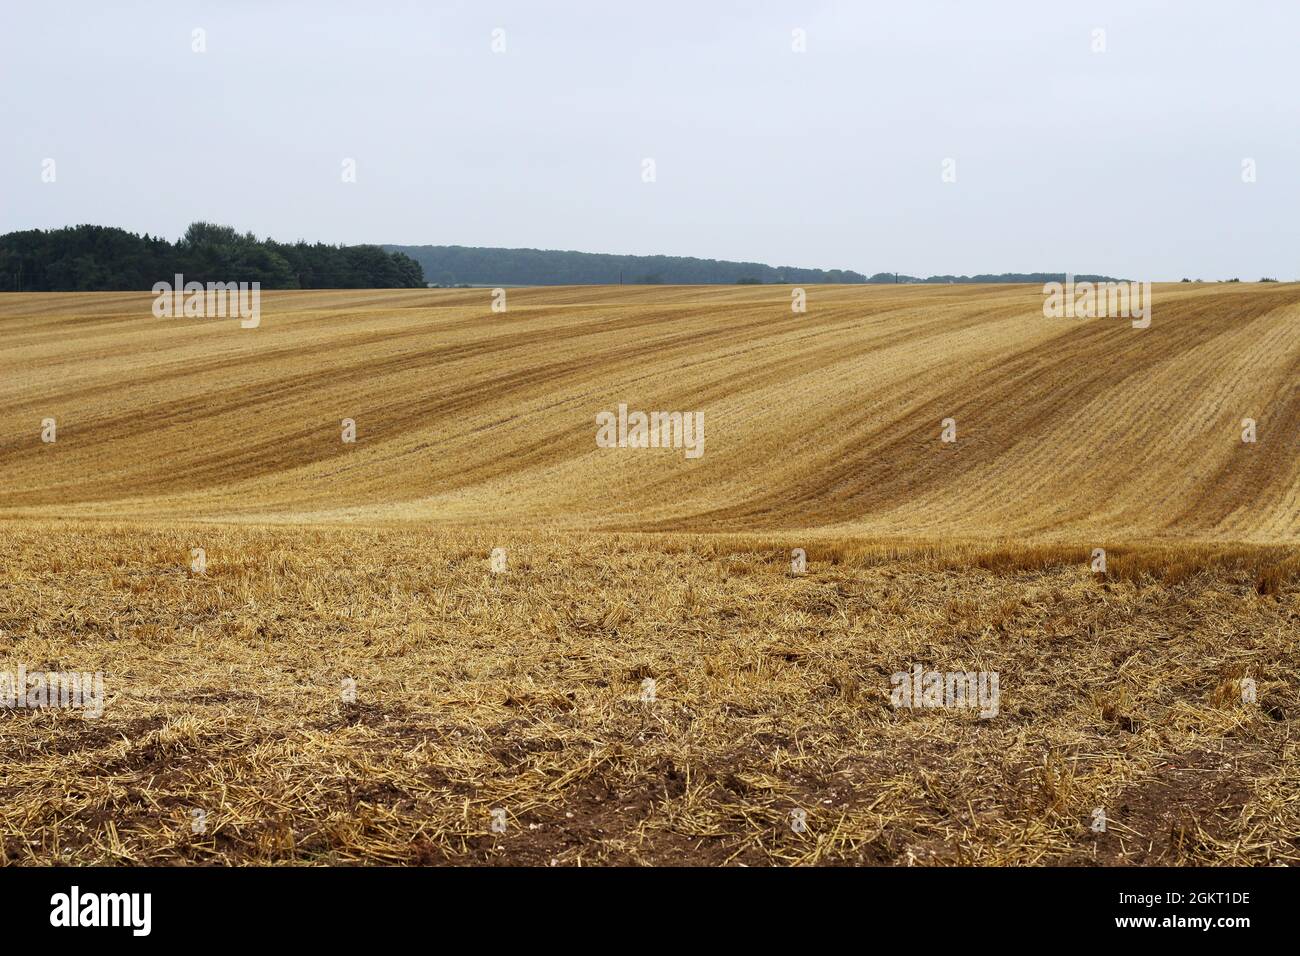 Rolling farmland in Lincolnshire, UK (taken in September after harvest, with wheat stubble and harvest lines) Stock Photo